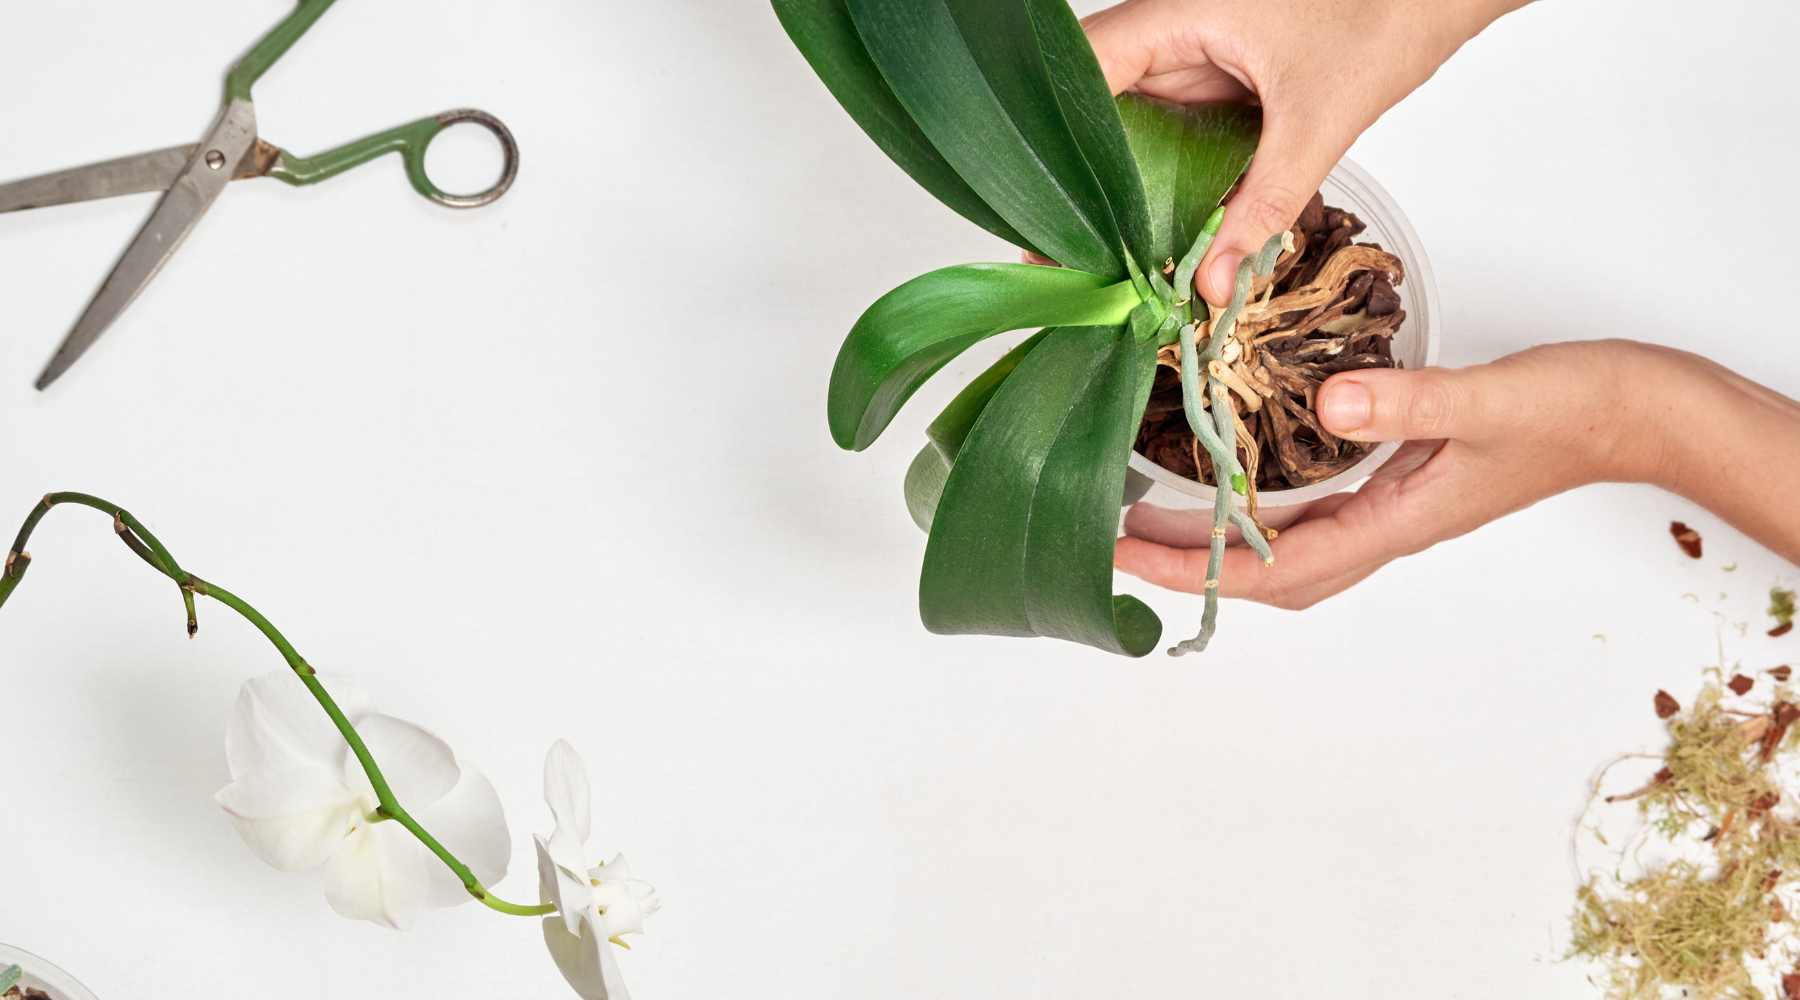 How do I re-pot an Orchid? How do I know when to re-pot it?